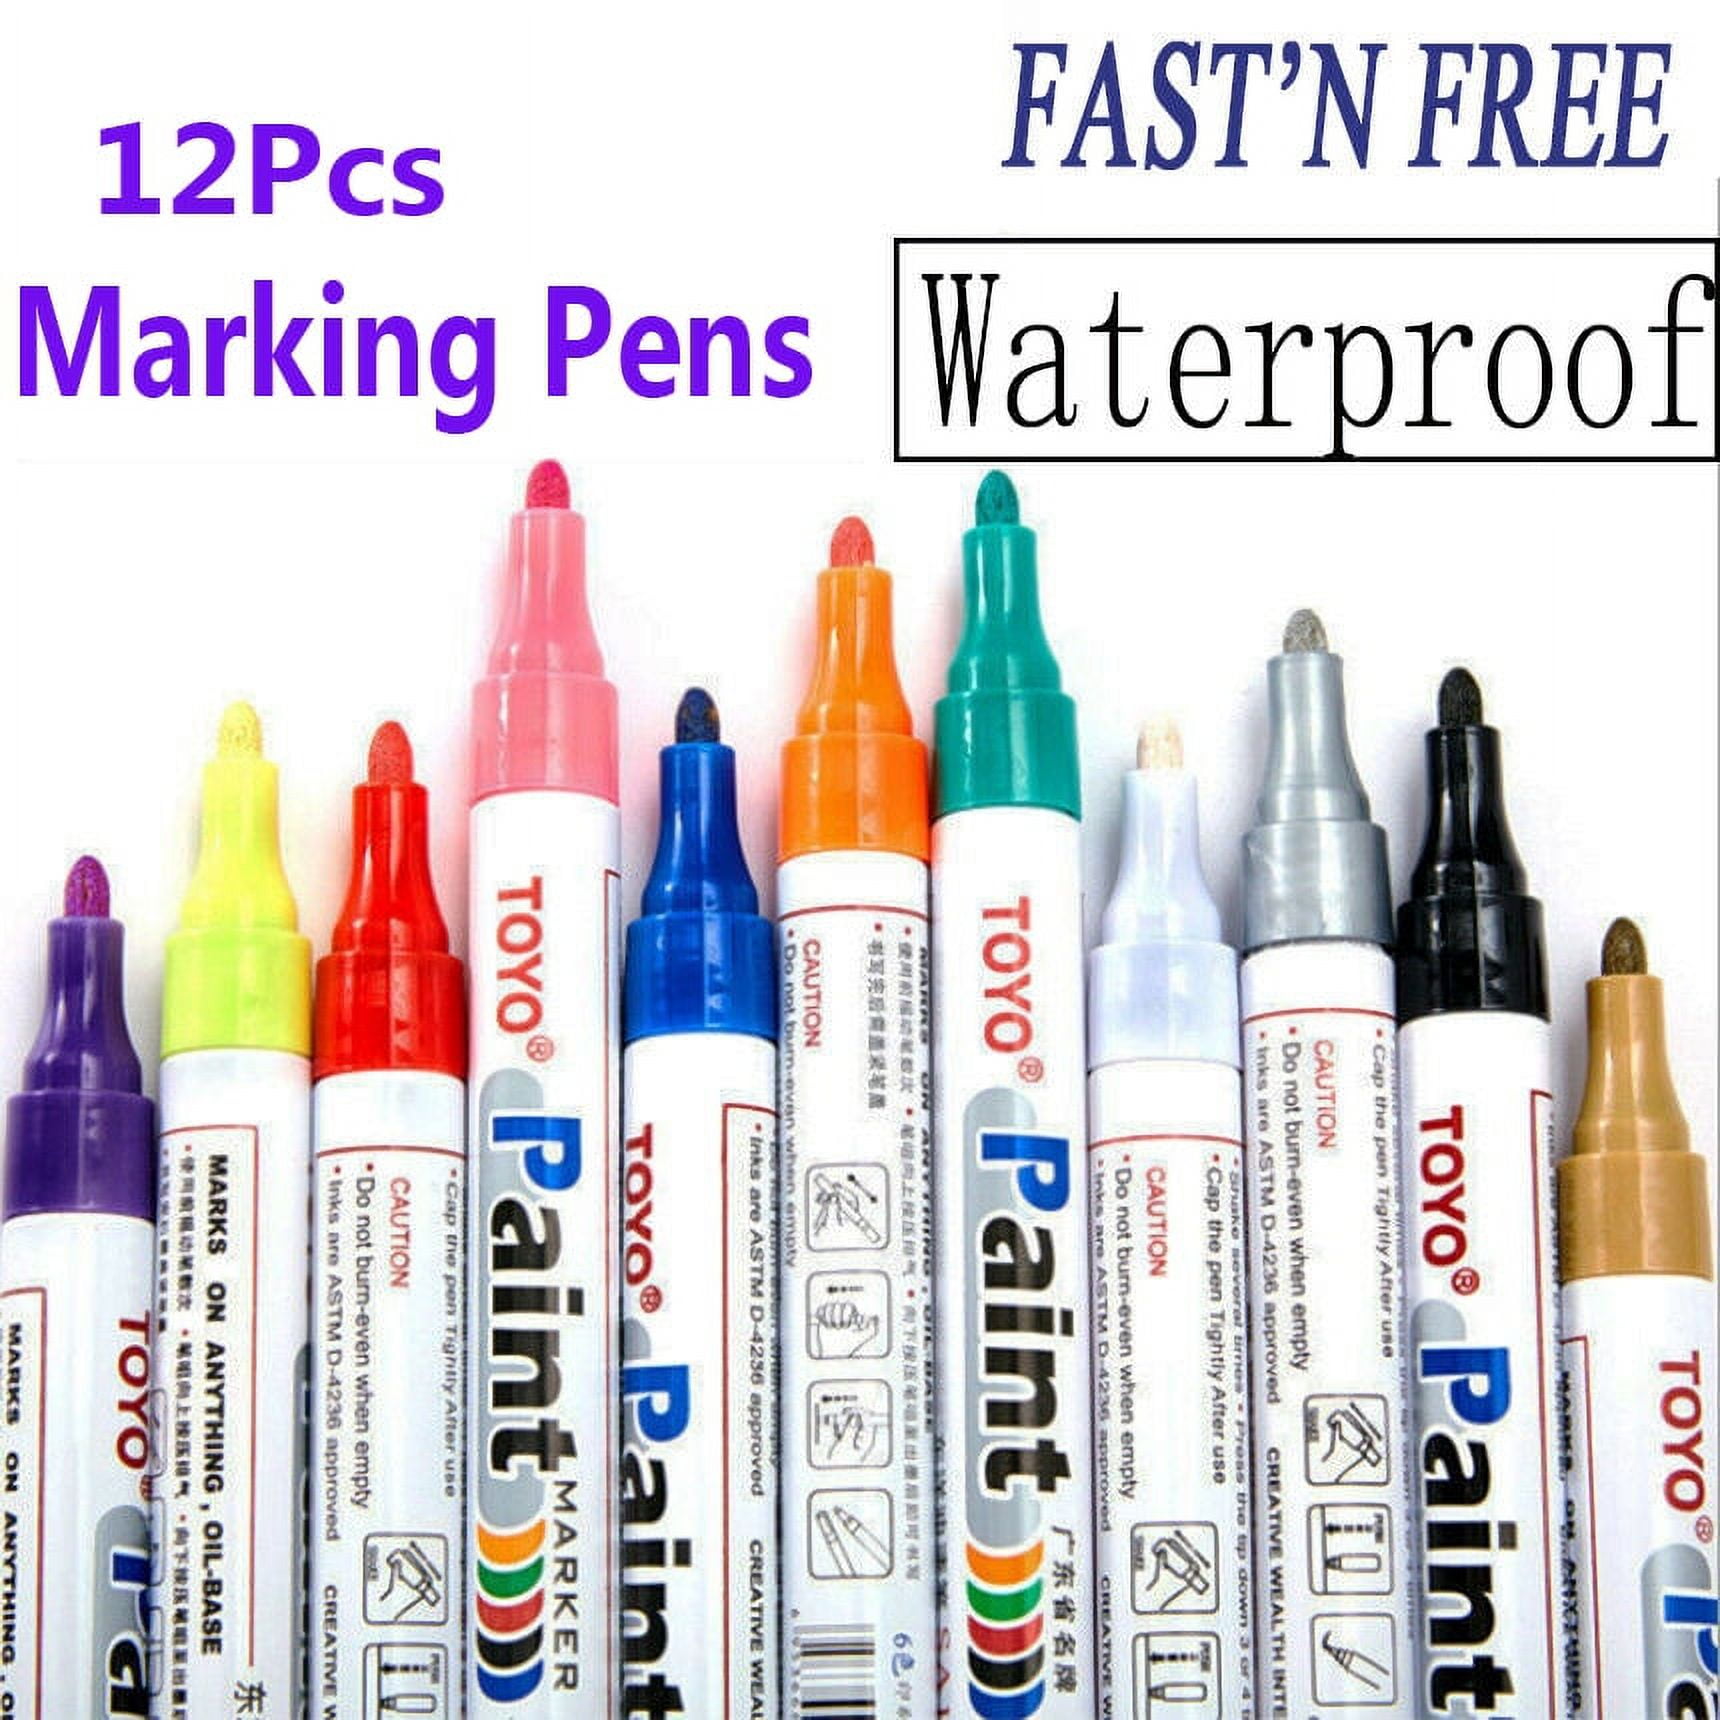 Permanent Paint Markers for Tires, Warehousing, Art, & Other Uses